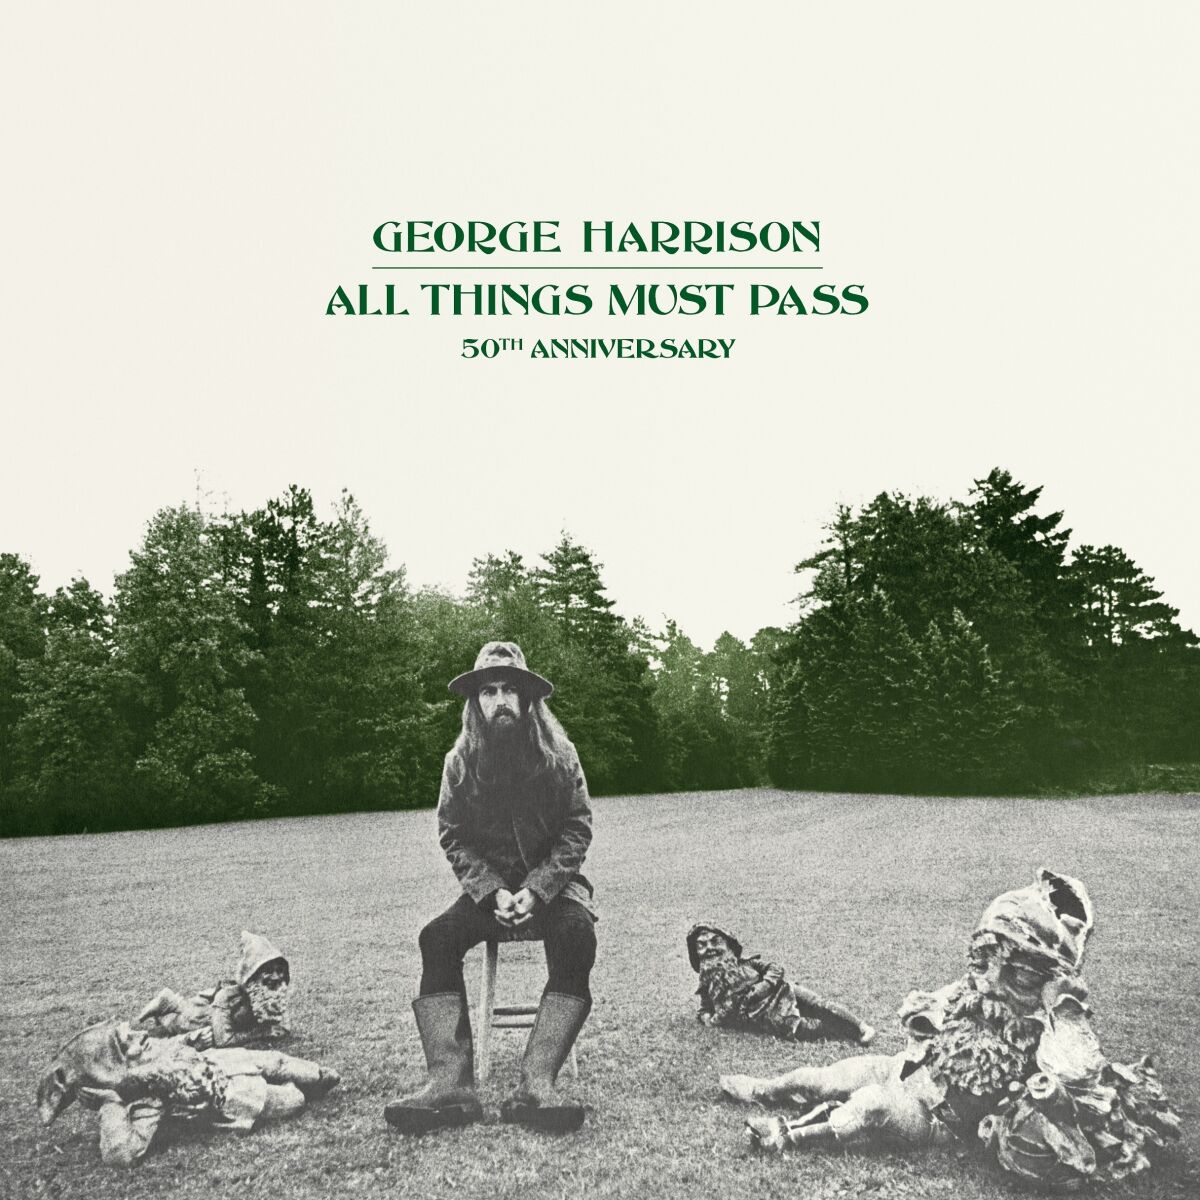 Harrison’s landmark album “All Things Must Pass” is celebrating its belated 50th anniversary this year. The original 23-track album — complete with hits “Isn’t It a Pity,” “What Is Life” and “My Sweet Lord” — has been remixed for the anniversary editions from Capitol/UMe and are now augmented with 47 demos and outtakes, 42 of them previously unreleased. (Capitol/UMe via AP)